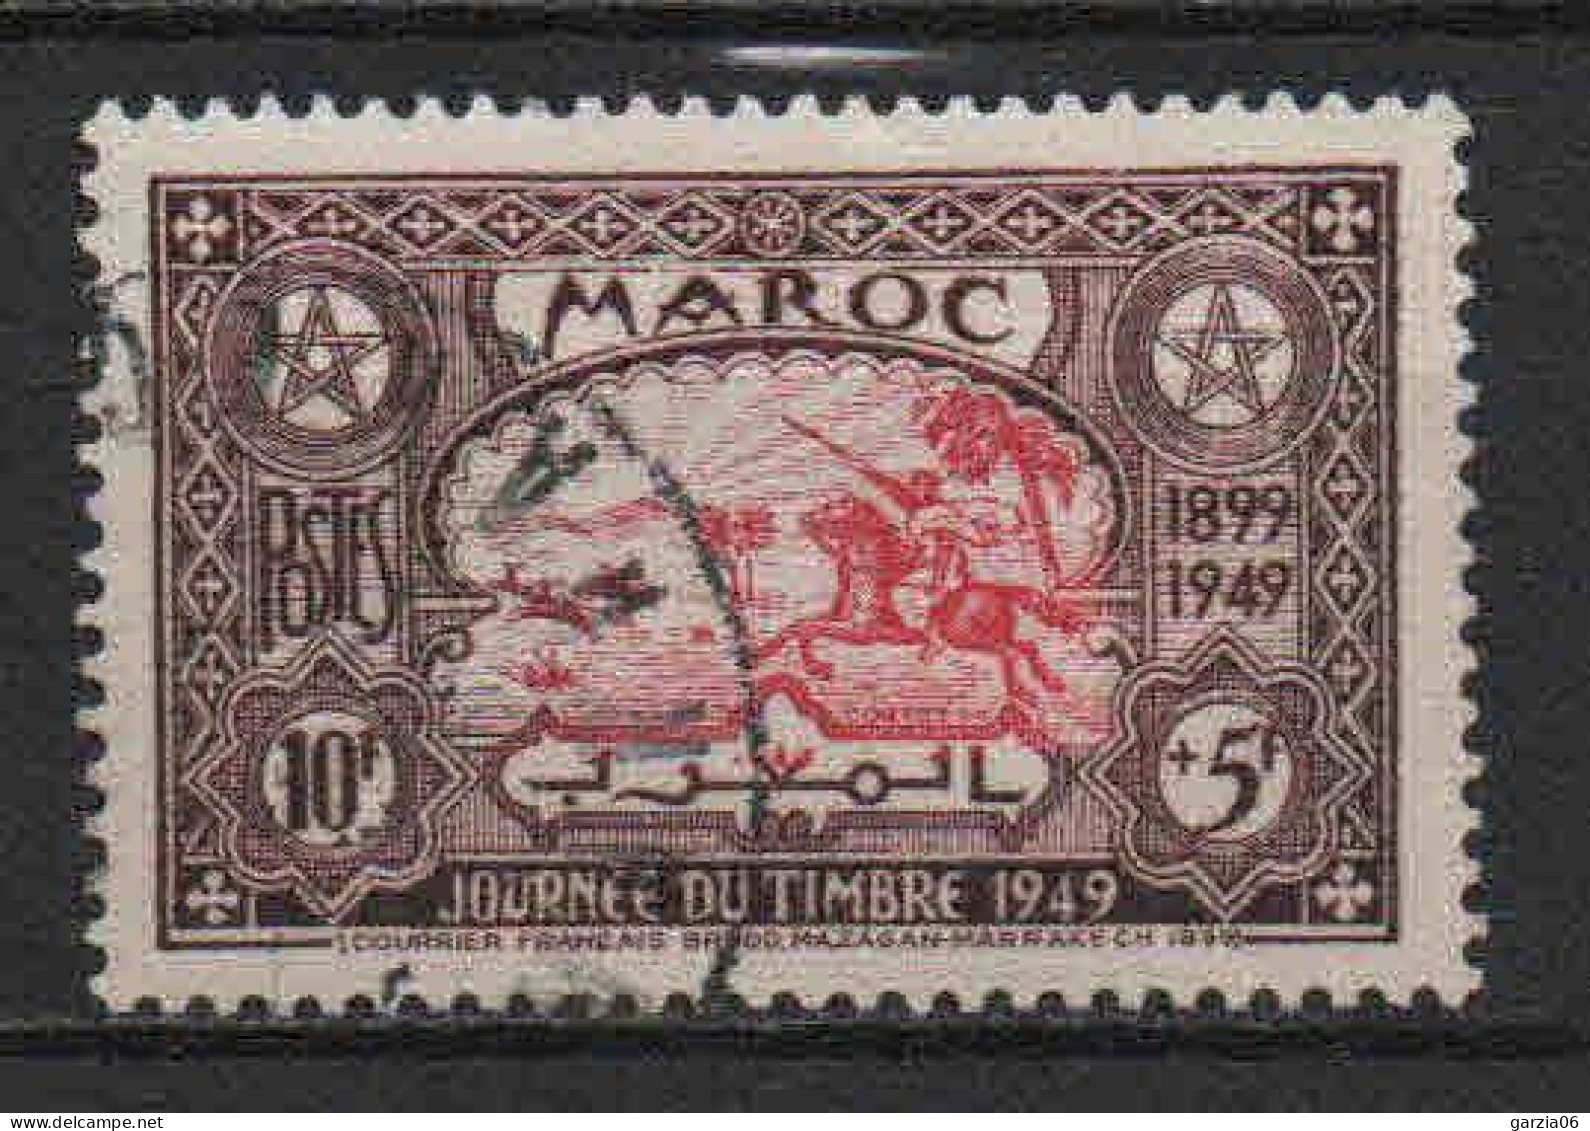 Maroc - 1949 - Journée Du Timbre -  N° 275 - Oblit - Used - Used Stamps